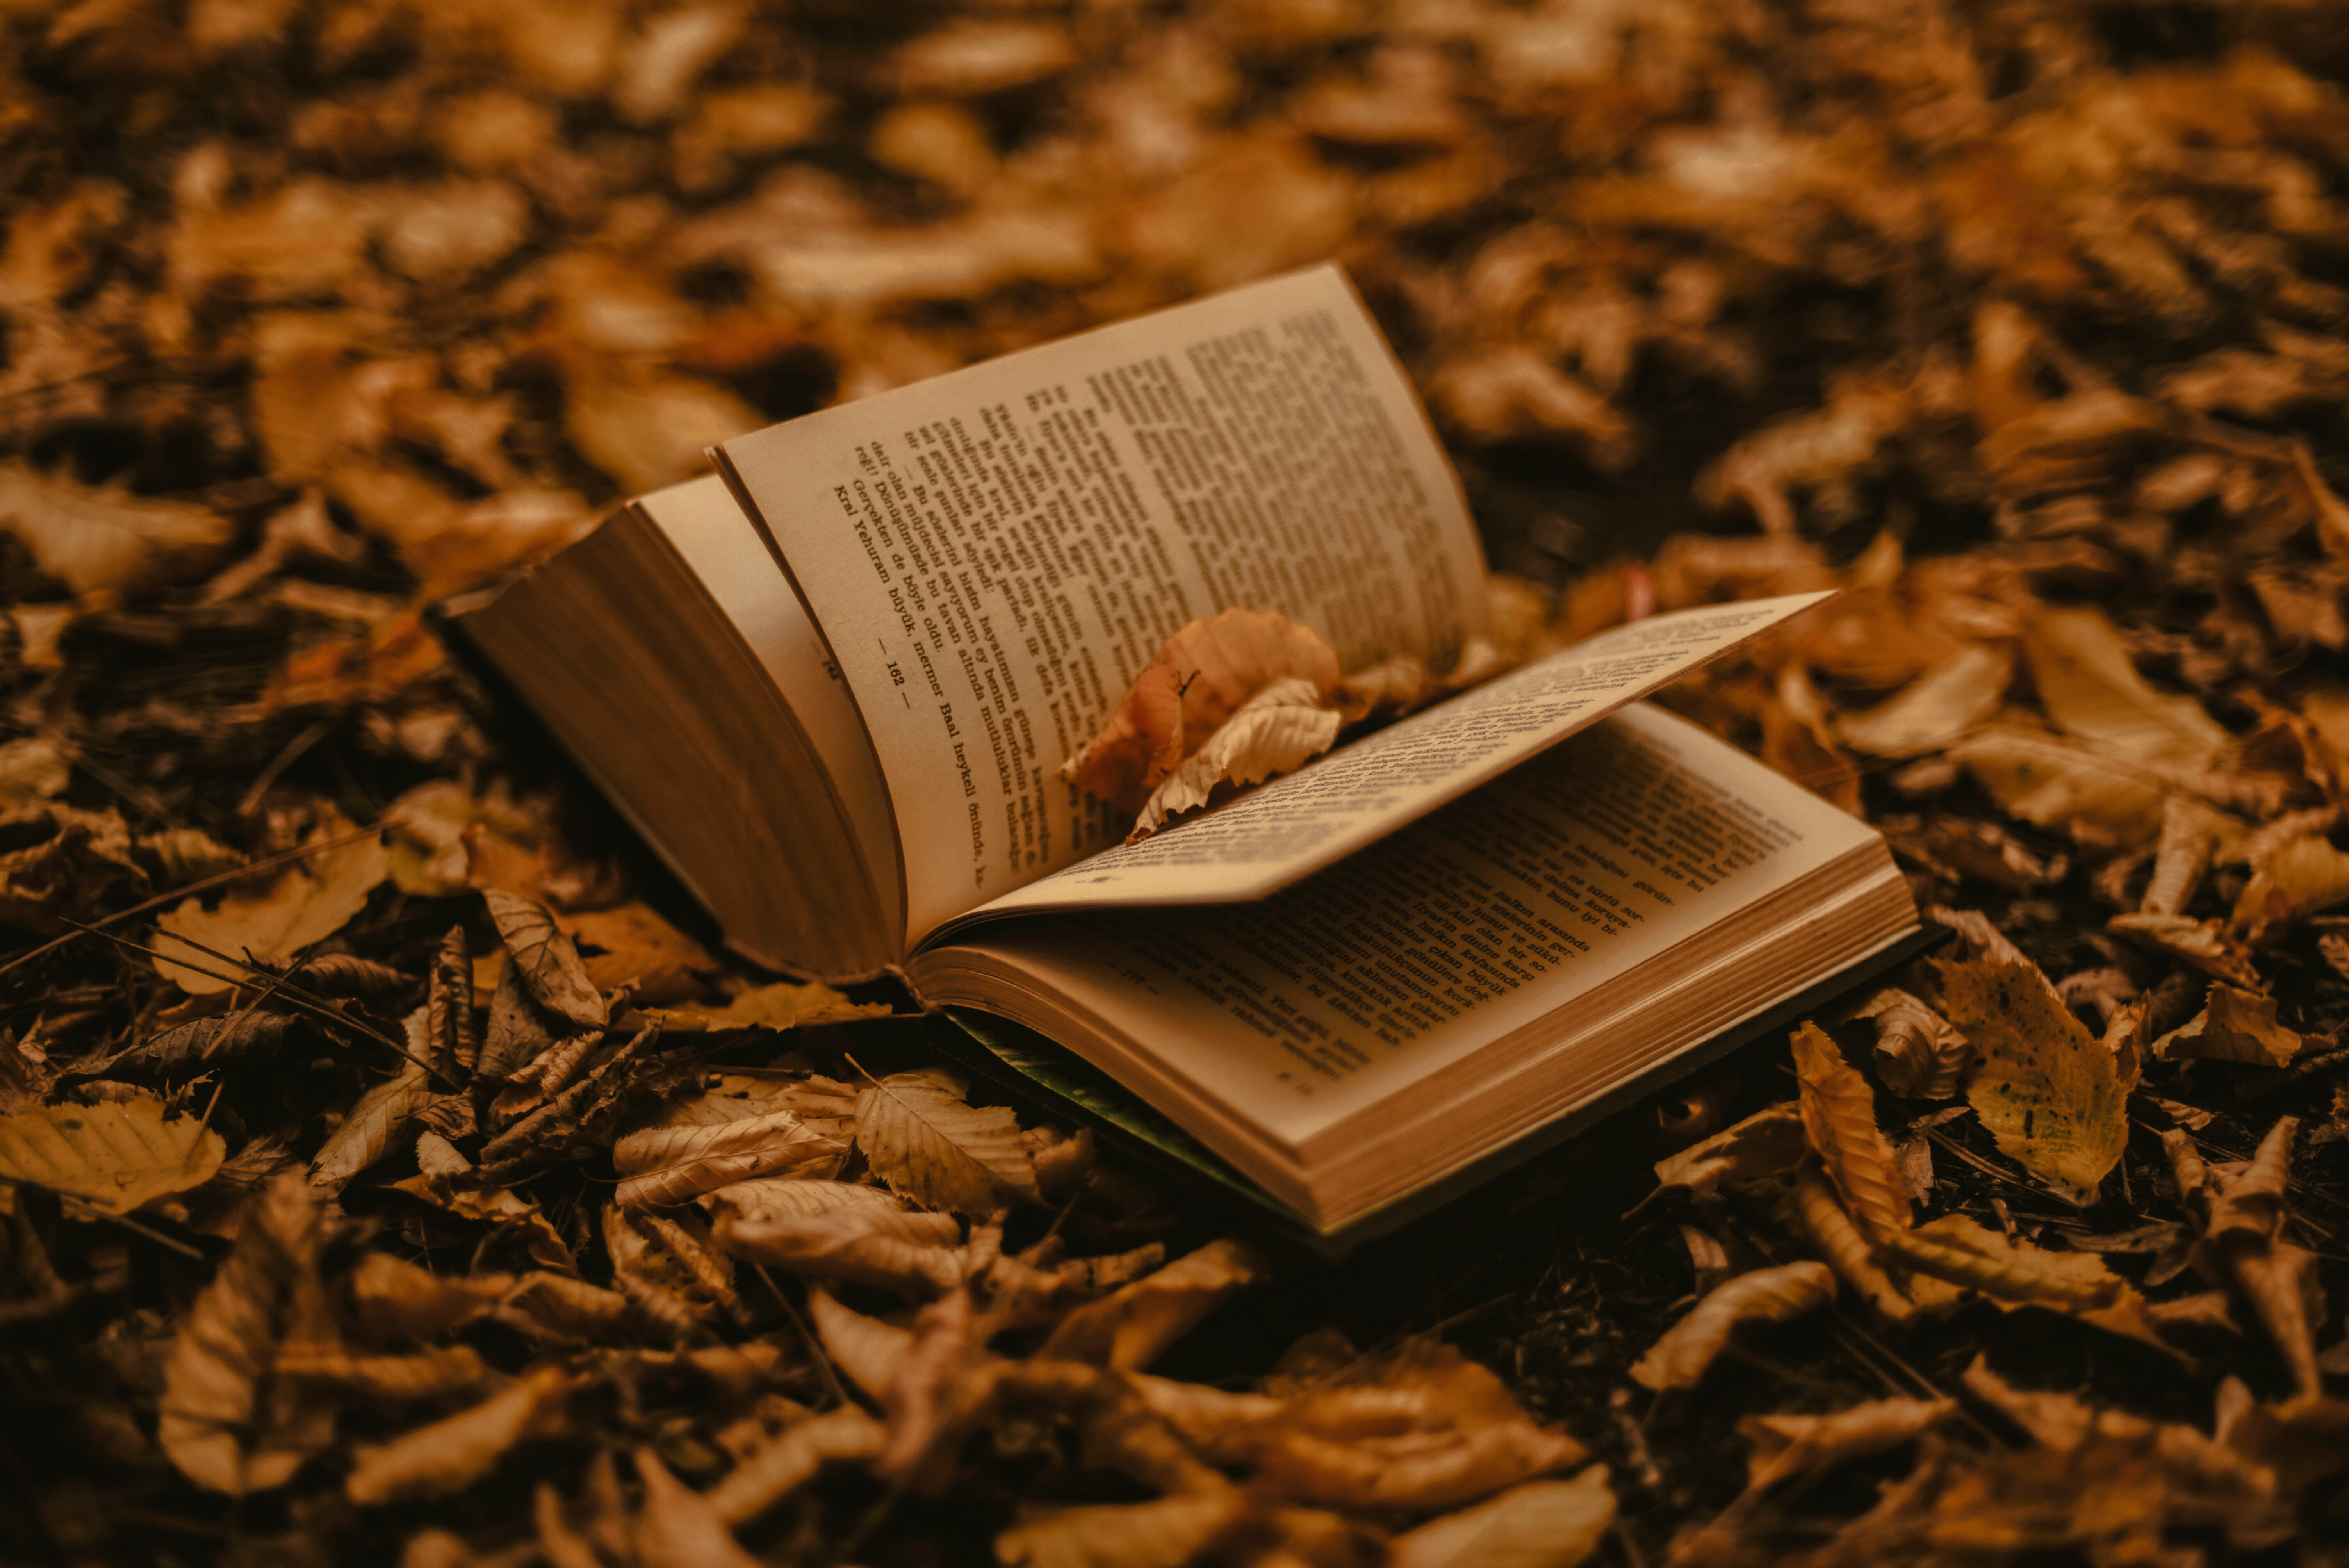 Book in the leaves